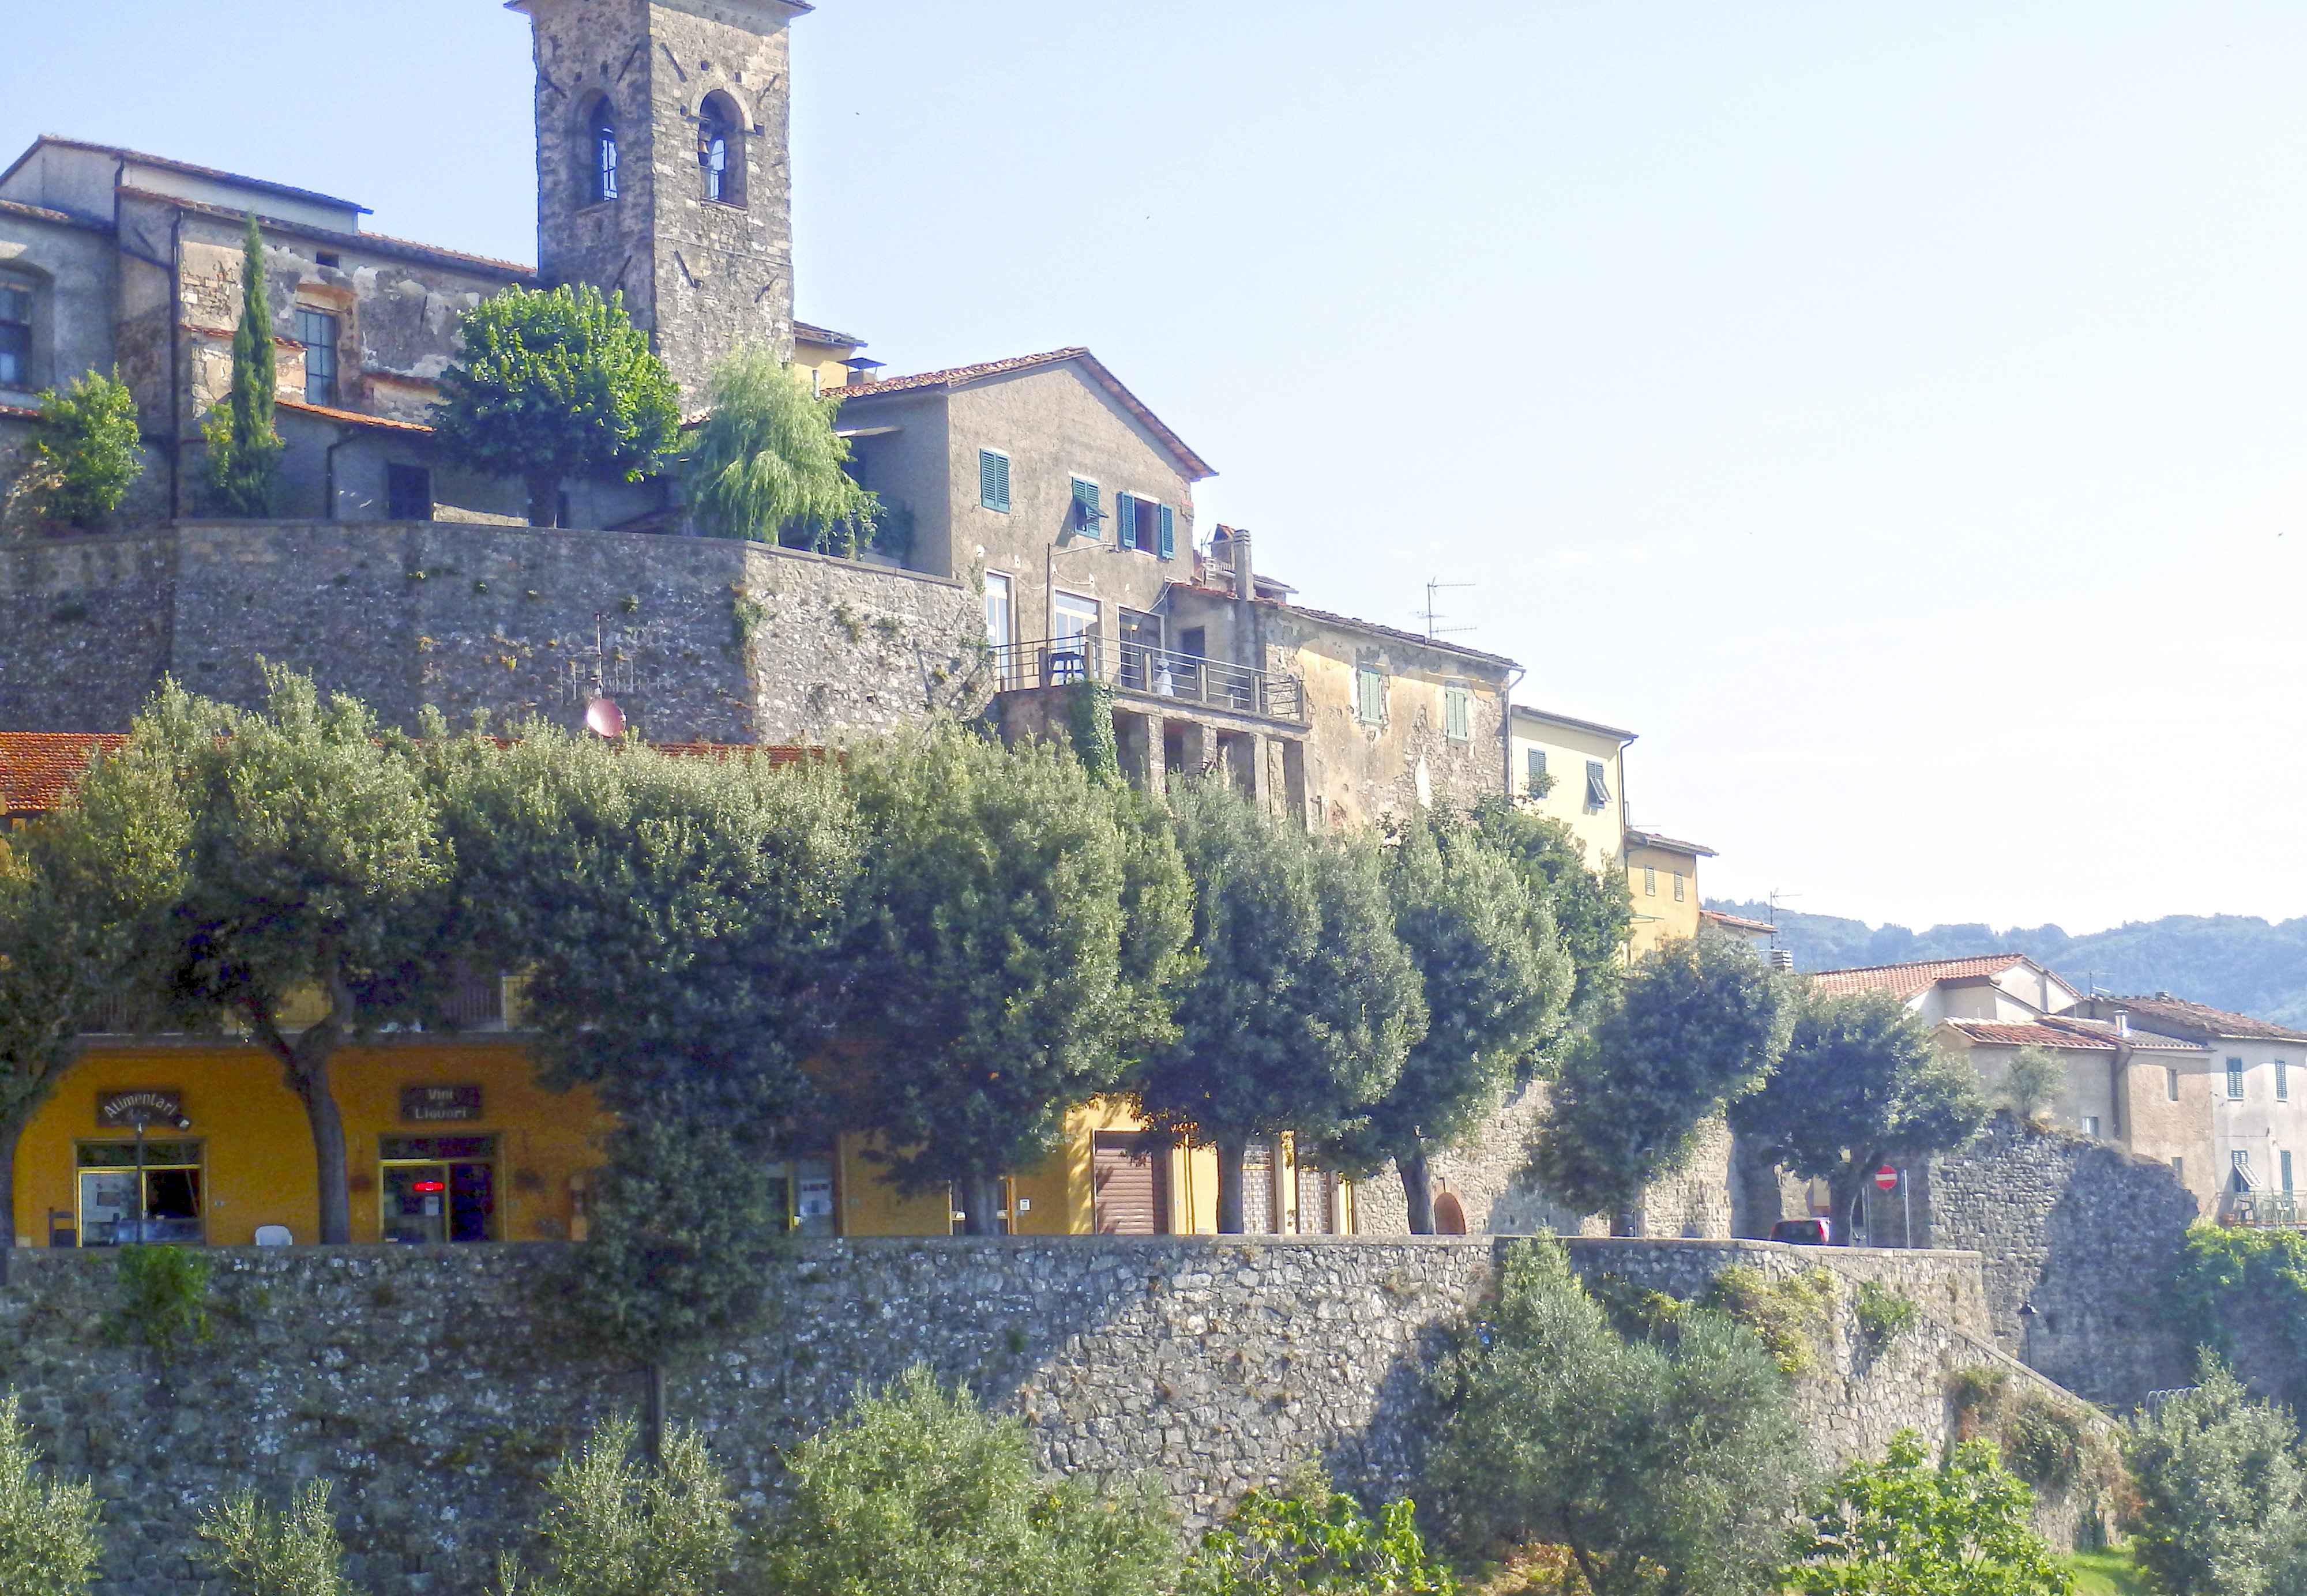 Small village In Tuscany.jpg